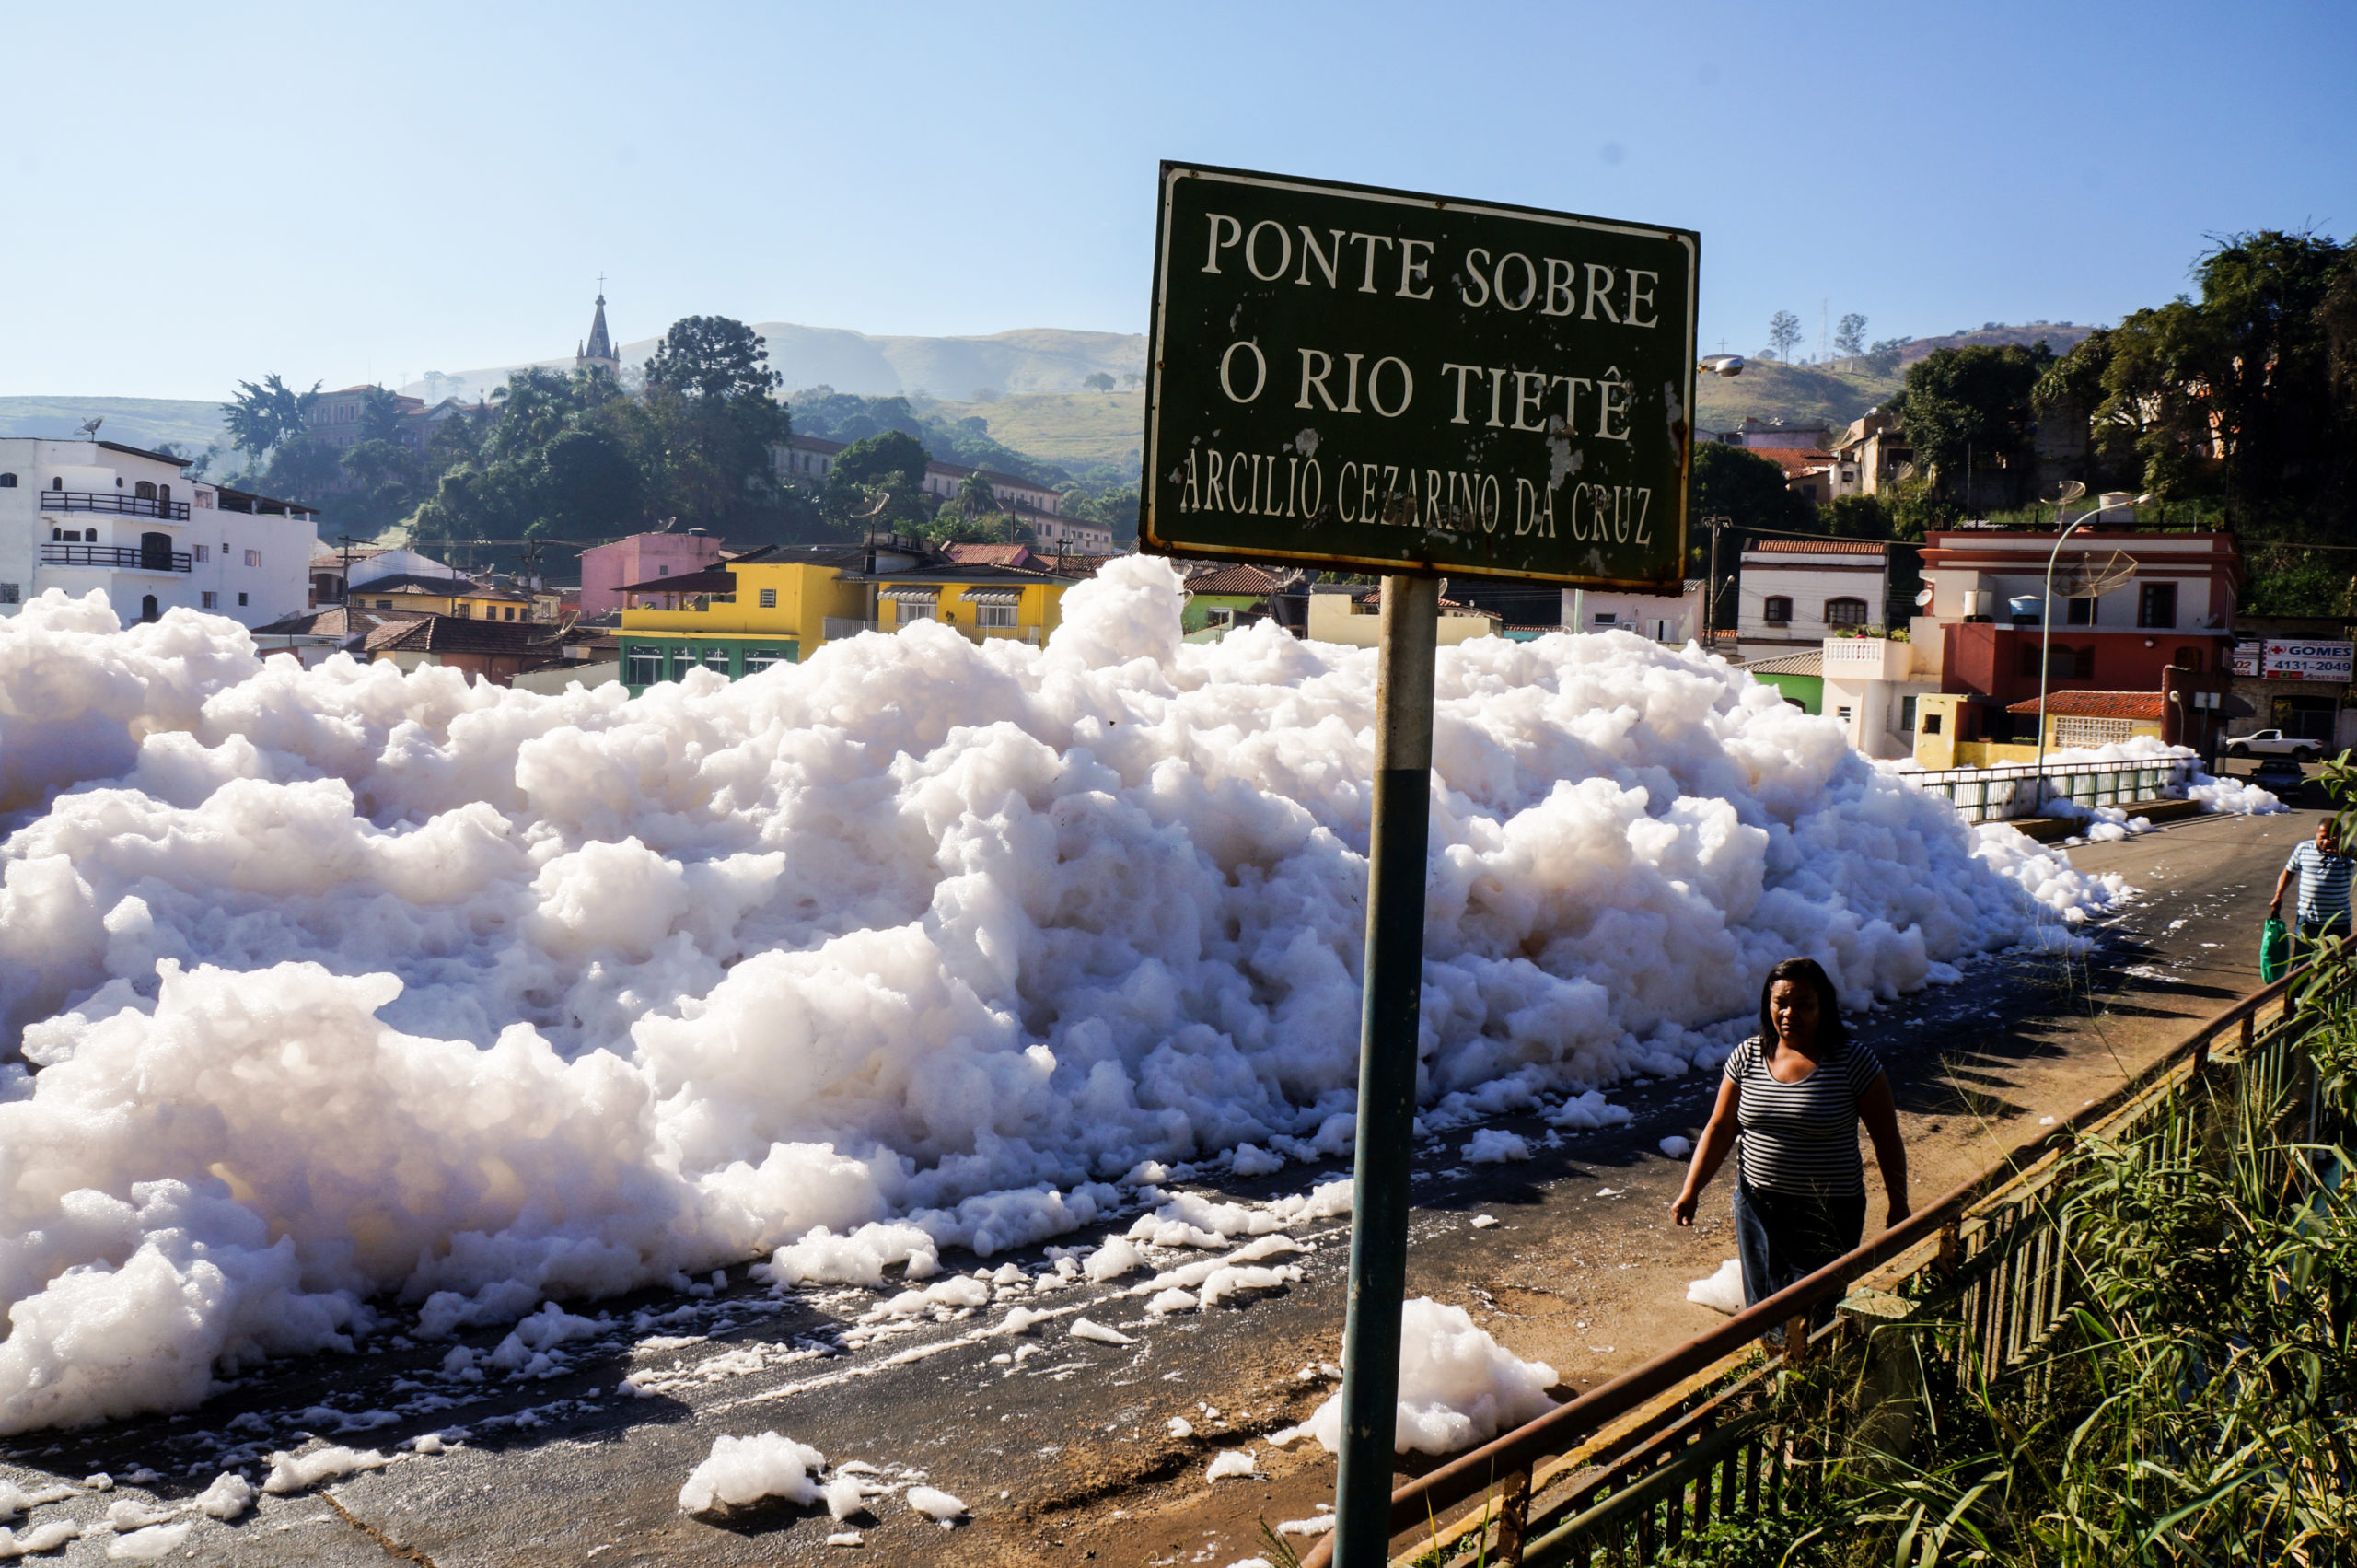 In Salto, the region presents a phenomenon in which the river is covered by foam when the waters are agitated.